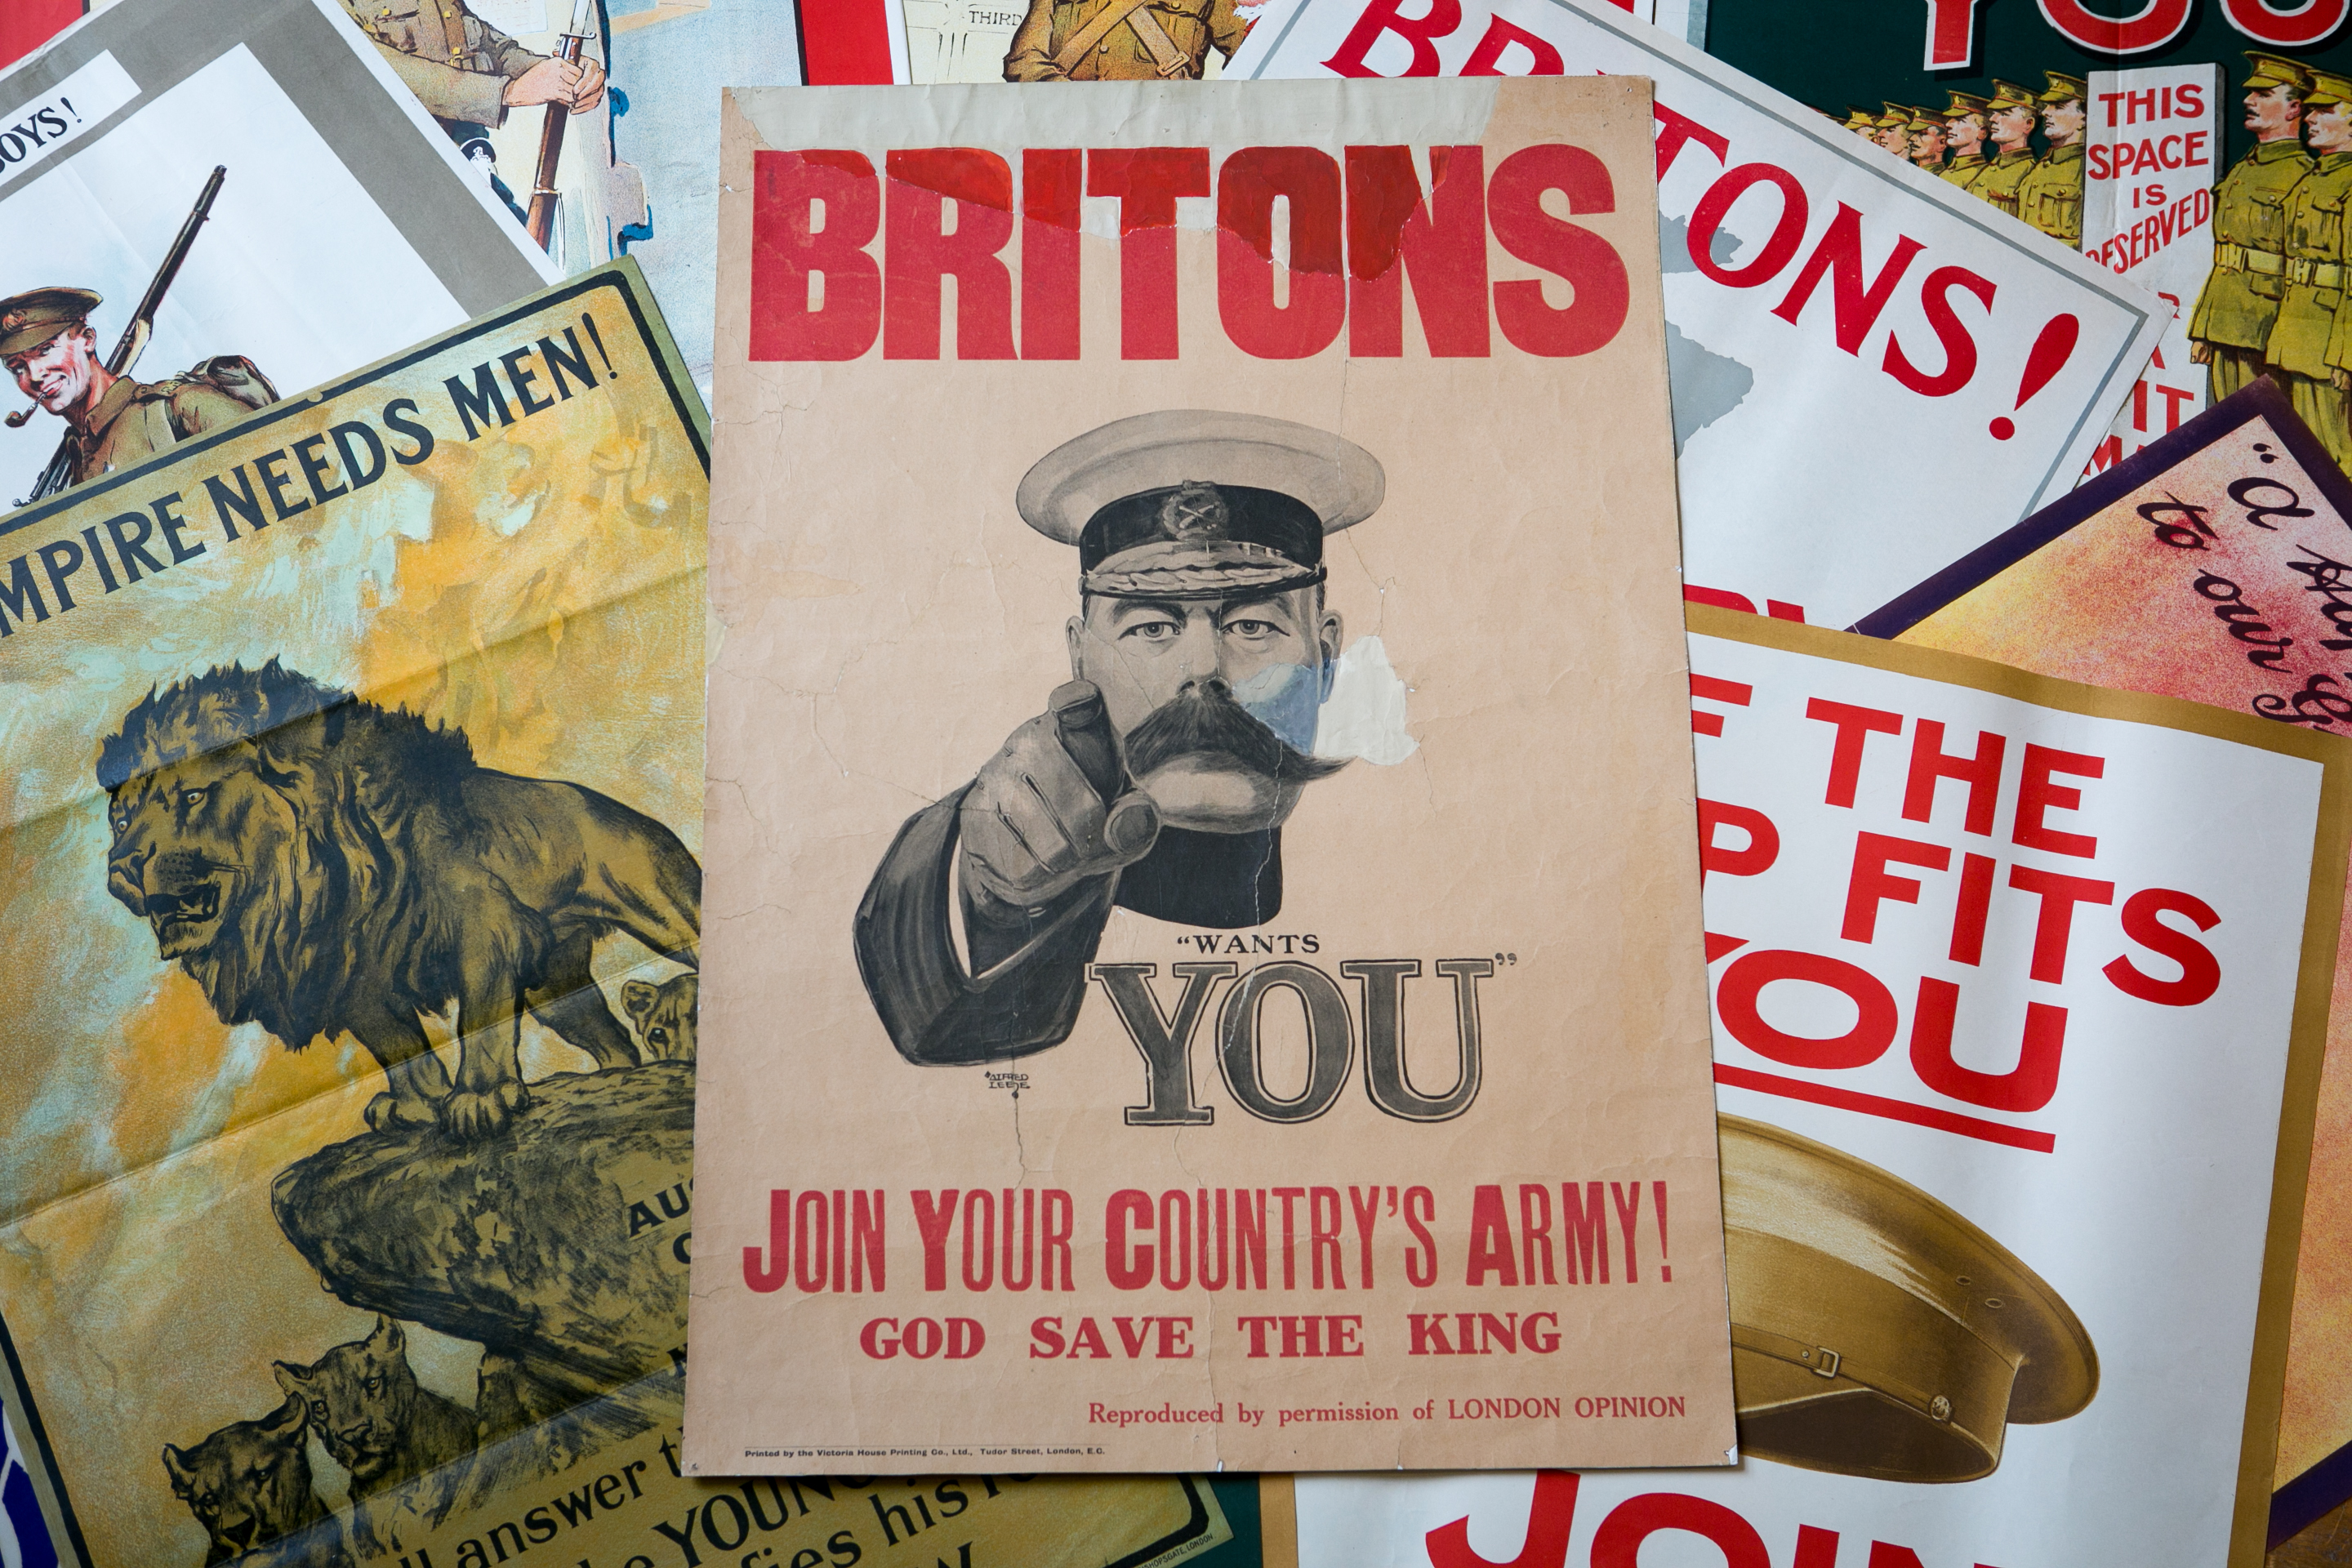 First World War recruitment posters including the Alfred Leete's Lord Kitchener's "Wants You" original recruiting poster from 1914 that is estimated at £10000 - £15000 and that are being sold tomorrow in the Onslows Auctioneers, The Great War Centenary and Summer Vintage Posters Auction are seen, on July 8, 2014 in Blandford Forum, England. (Photo by Matt Cardy/Getty Images)